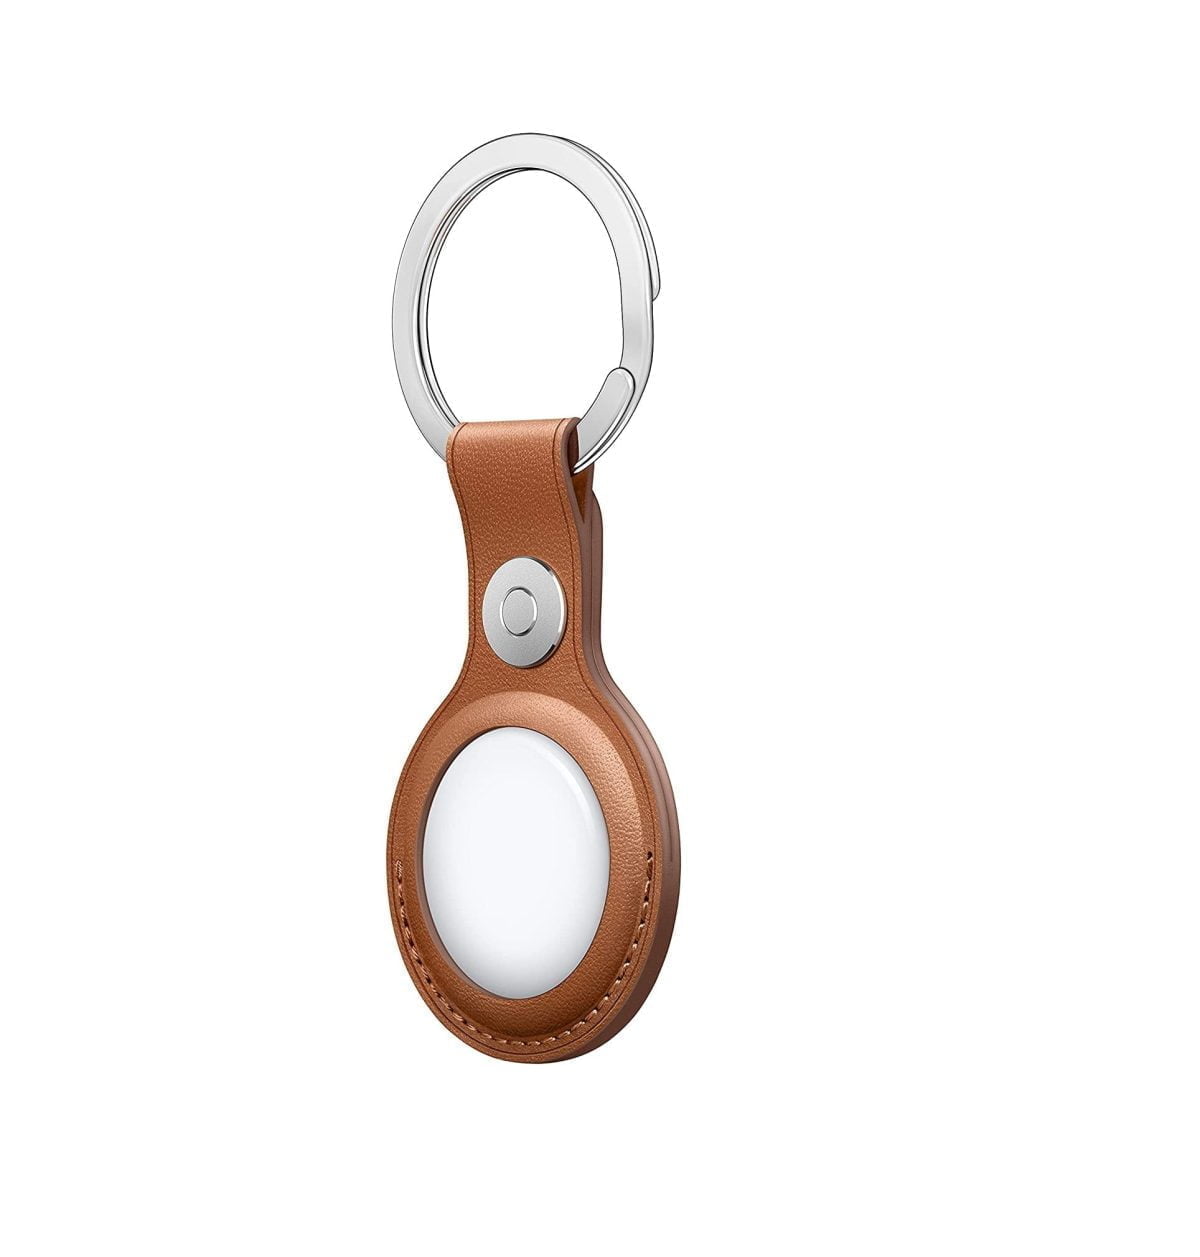 Apple &Lt;H1&Gt;Apple Airtag Leather Key Ring - Saddle Brown&Lt;/H1&Gt; &Lt;Ul Class=&Quot;A-Unordered-List A-Vertical A-Spacing-Mini&Quot;&Gt; &Lt;Li&Gt;&Lt;Span Class=&Quot;A-List-Item&Quot;&Gt;The Leather Key Ring Is Thoughtfully Crafted From The Finest Materials.&Lt;/Span&Gt;&Lt;/Li&Gt; &Lt;Li&Gt;&Lt;Span Class=&Quot;A-List-Item&Quot;&Gt;The Stainless Steel Is As Striking As It Is Strong, While The European Leather Is Specially Tanned And Soft To The Touch.&Lt;/Span&Gt;&Lt;/Li&Gt; &Lt;Li&Gt;&Lt;Span Class=&Quot;A-List-Item&Quot;&Gt;And It Fits Snugly Over Your Airtag, So You Never Have To Worry About It Falling Out.&Lt;/Span&Gt;&Lt;/Li&Gt; &Lt;/Ul&Gt; &Lt;Em&Gt;&Lt;Strong&Gt;Note: Air Tag Not Included&Lt;/Strong&Gt;&Lt;/Em&Gt; Leather Key Ring Apple Airtag Leather Key Ring - Saddle Brown